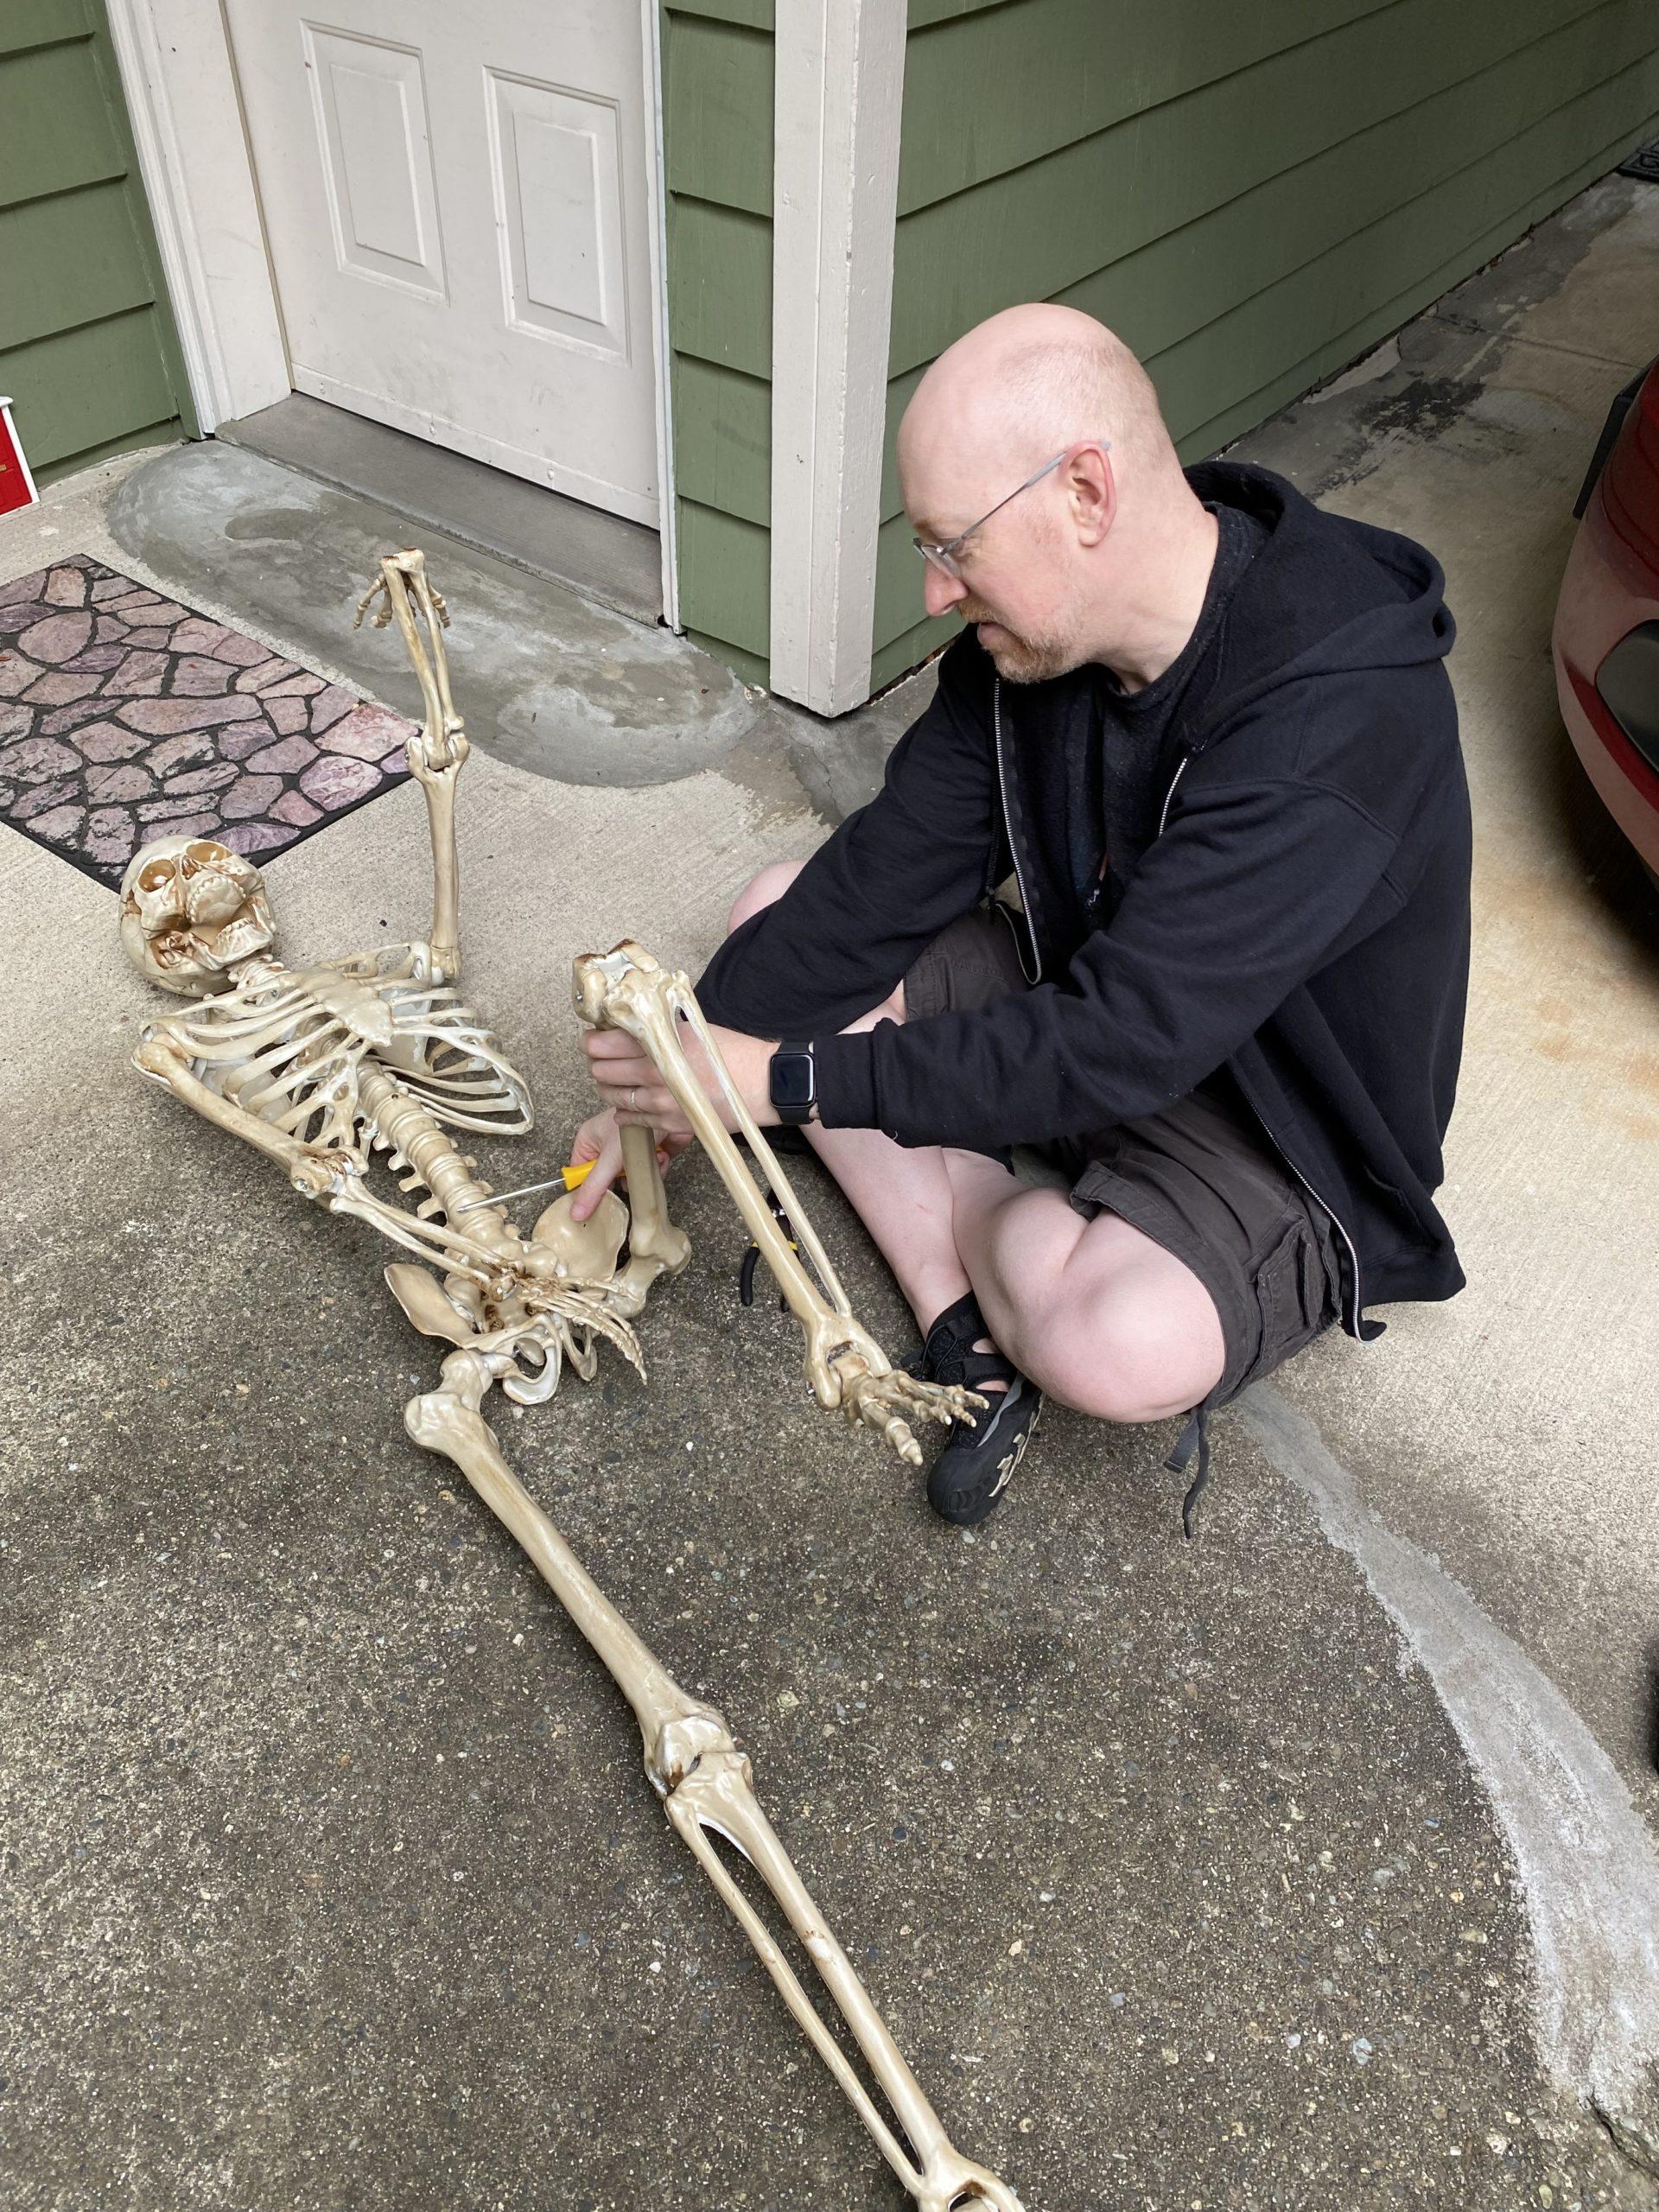 Me sitting on the ground in front of our front door, adjusting a poseable decorative skeleton on the ground in front of me.